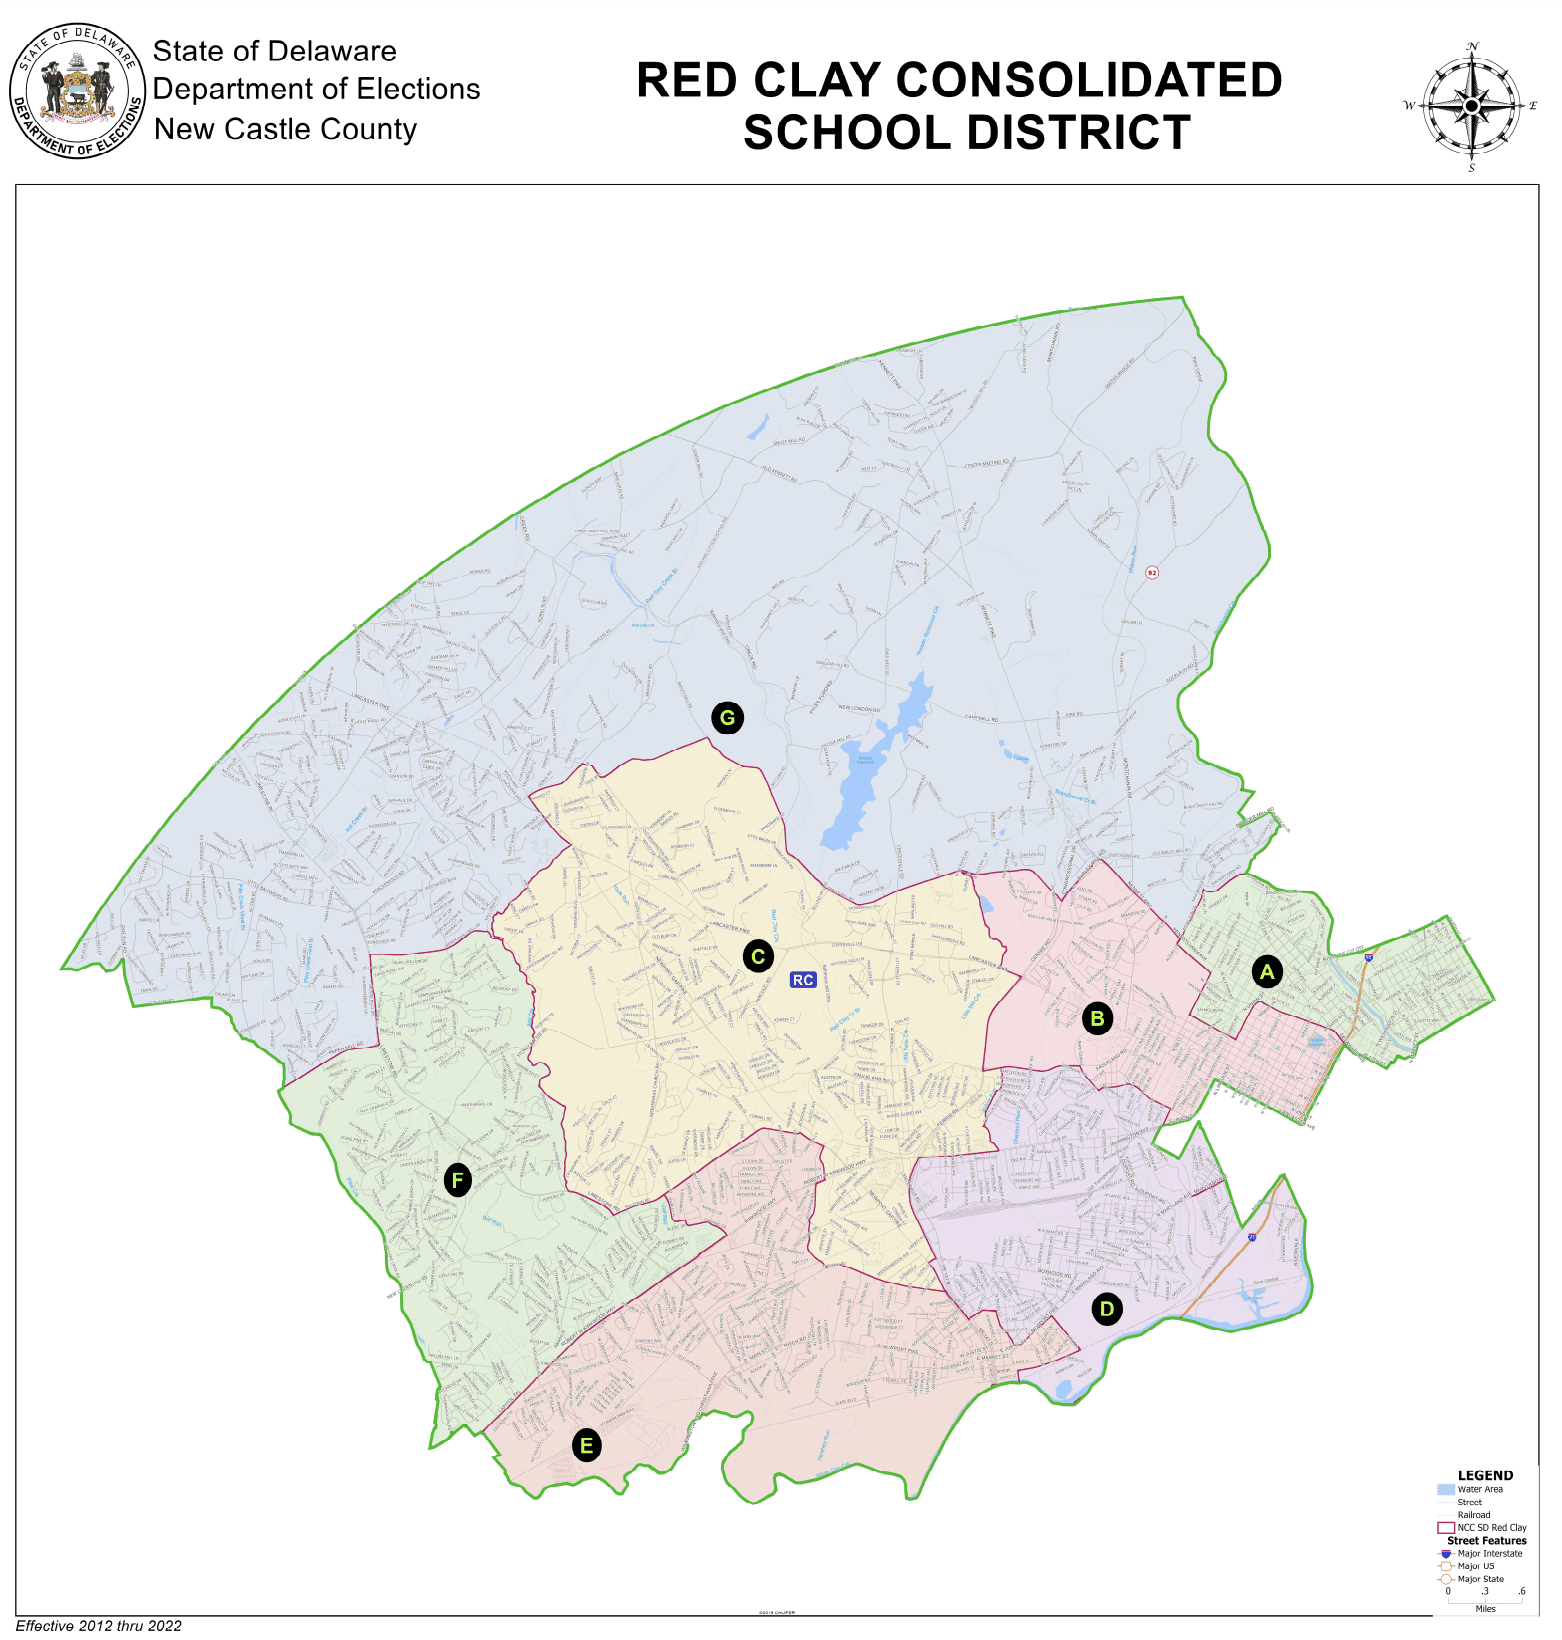 The seven districts that make up Red Clay Consolidated School District. Jose Matthews alleges that Martin Wilson doesn't actually live in District B. 